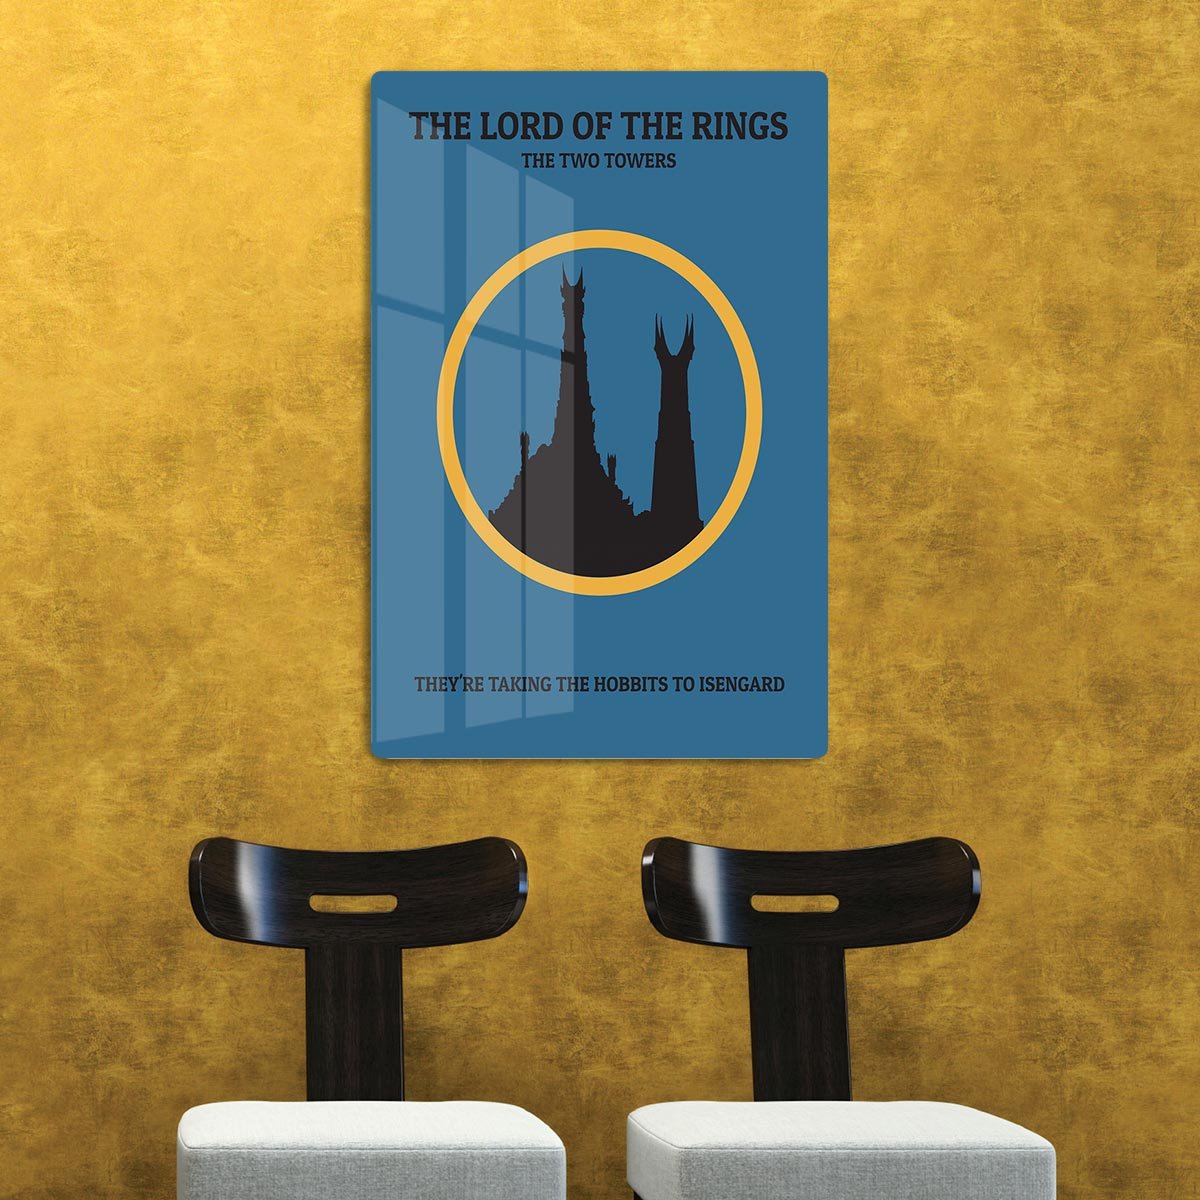 The Lord Of The Rings The Two Towers Minimal Movie HD Metal Print